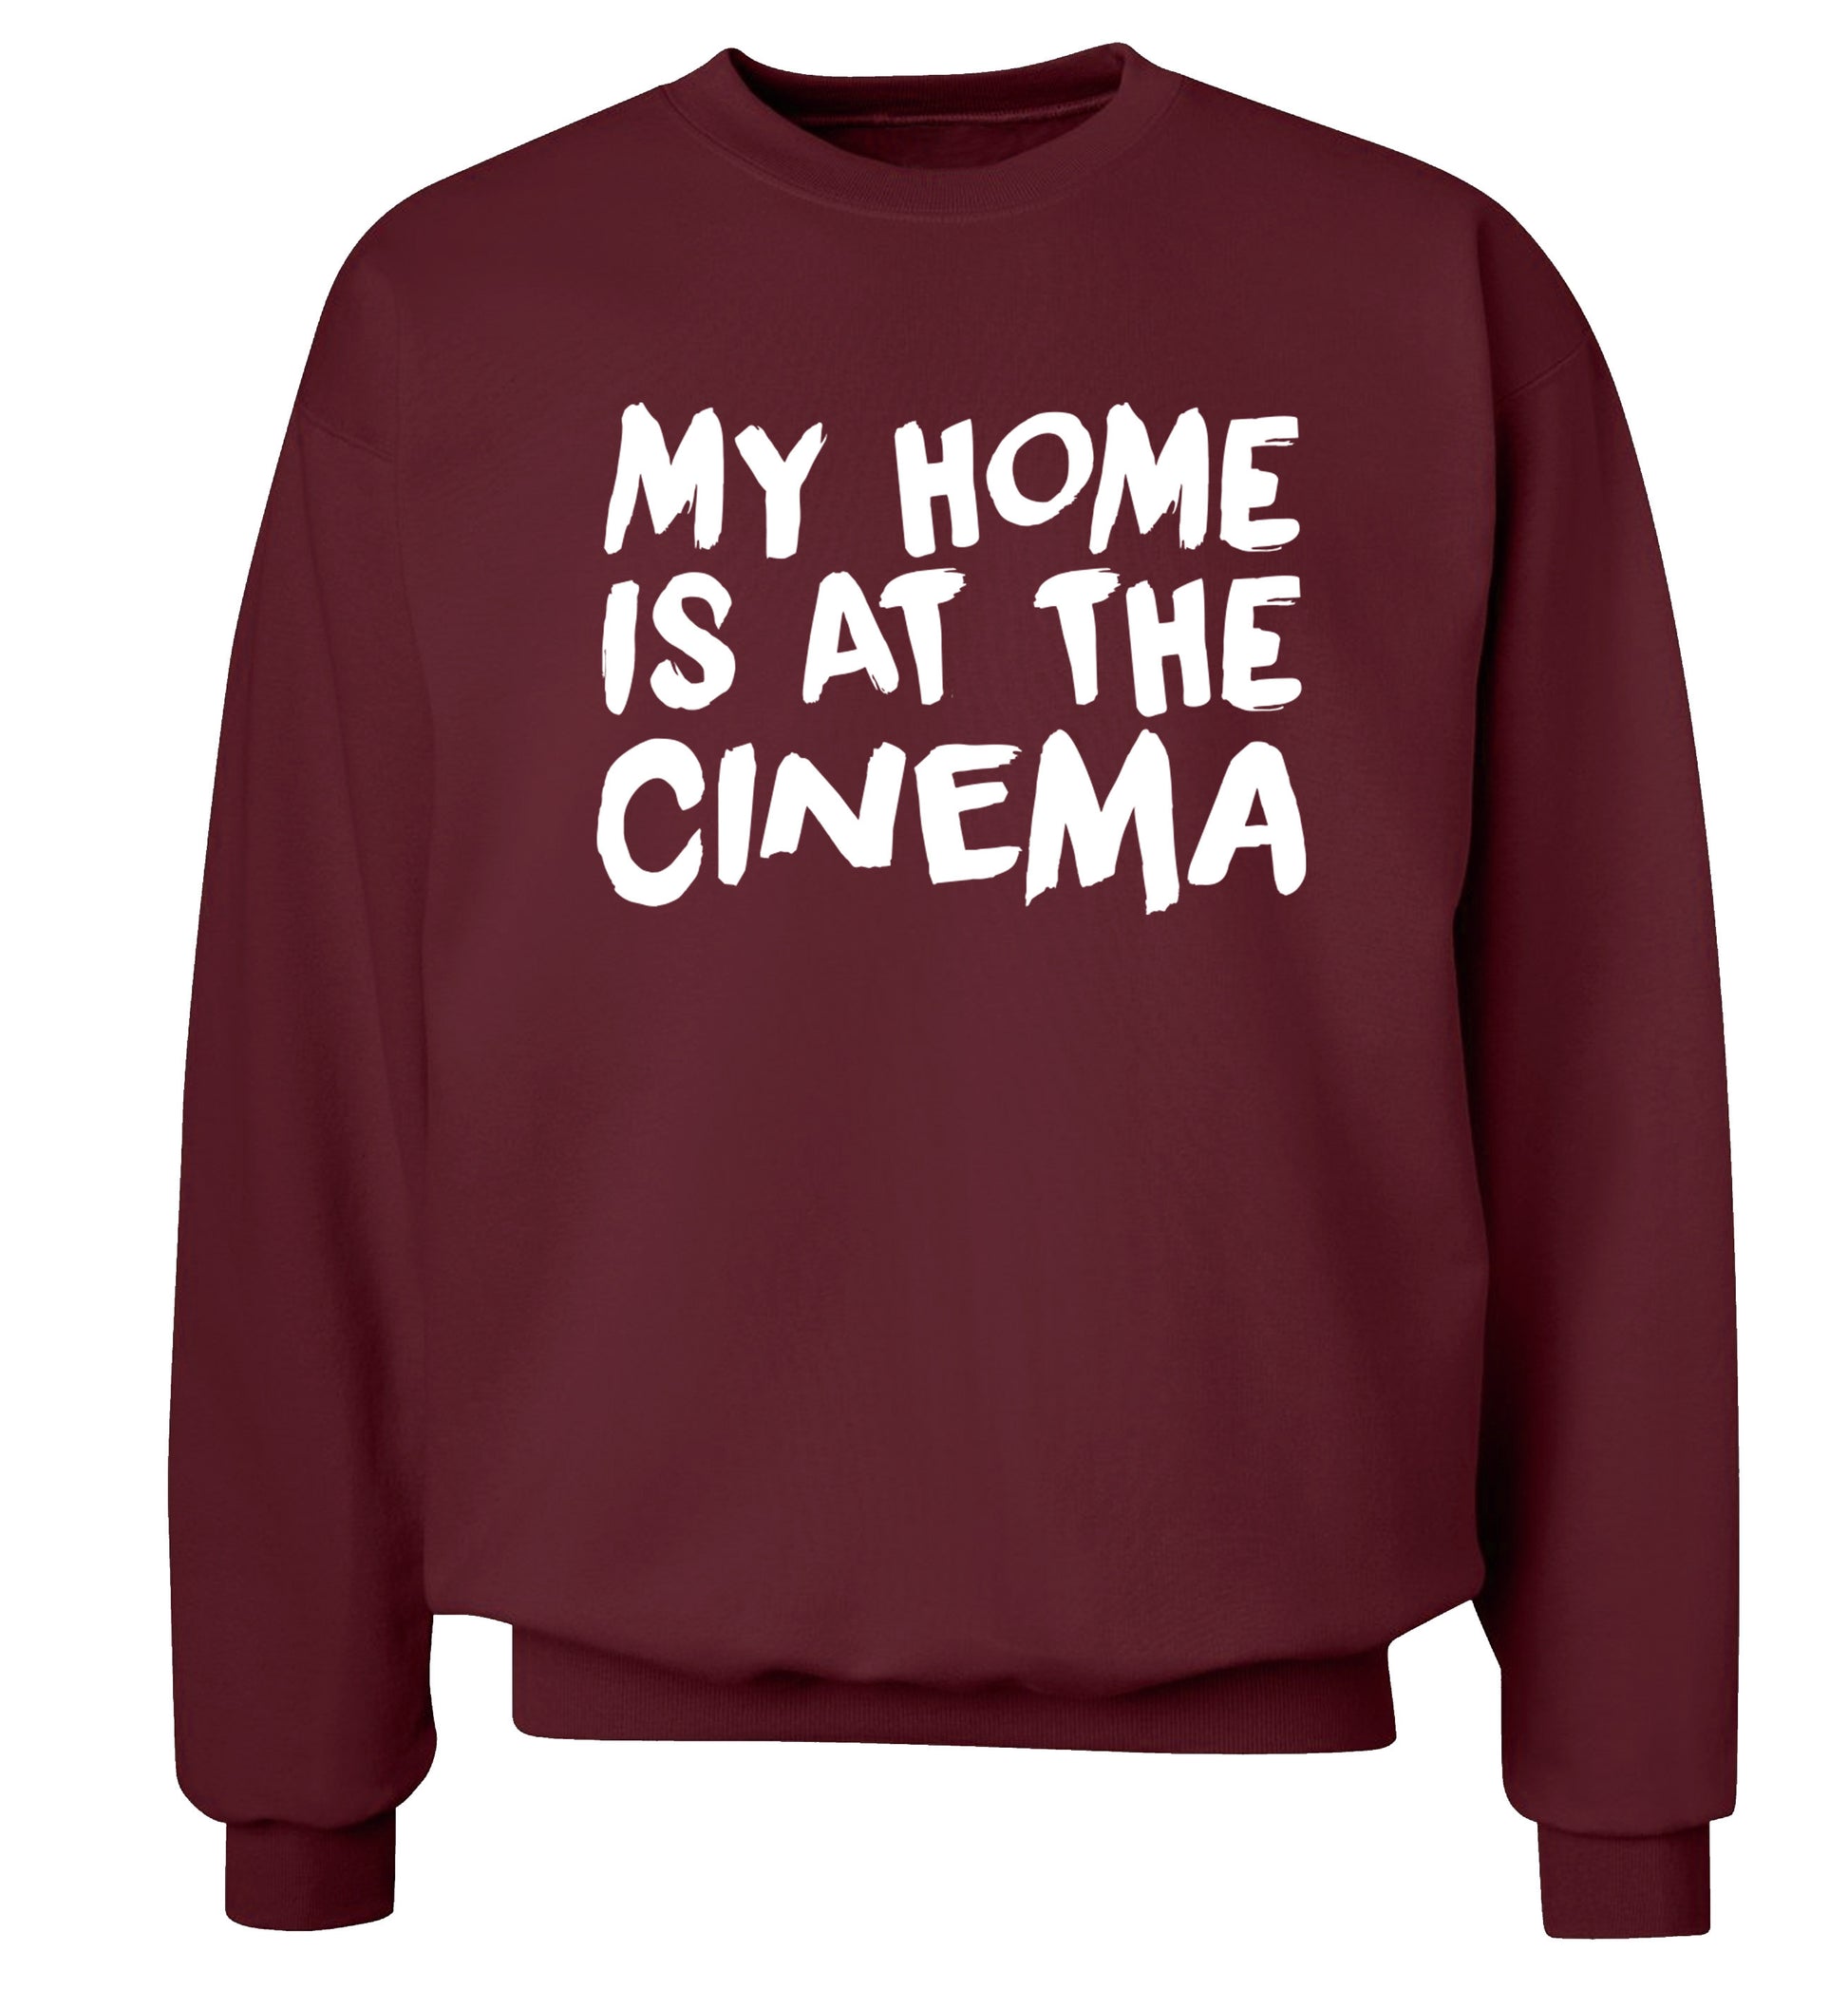 My home is at the cinema Adult's unisex maroon Sweater 2XL